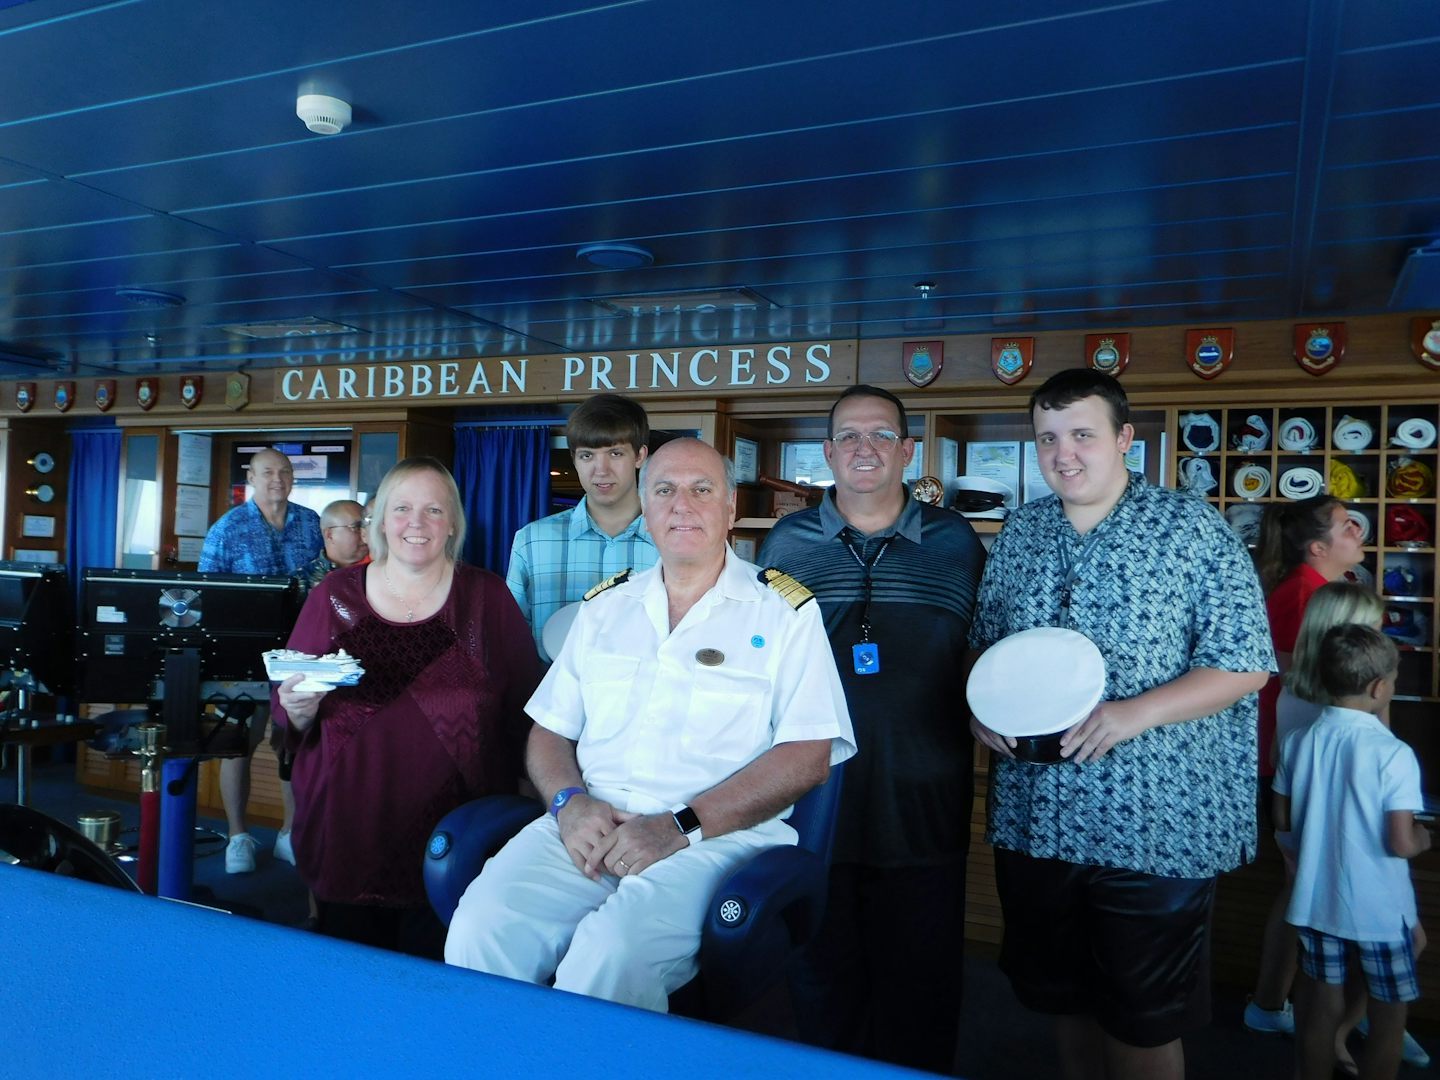 My Family and I were invited to the bridge of the ship and the Security off